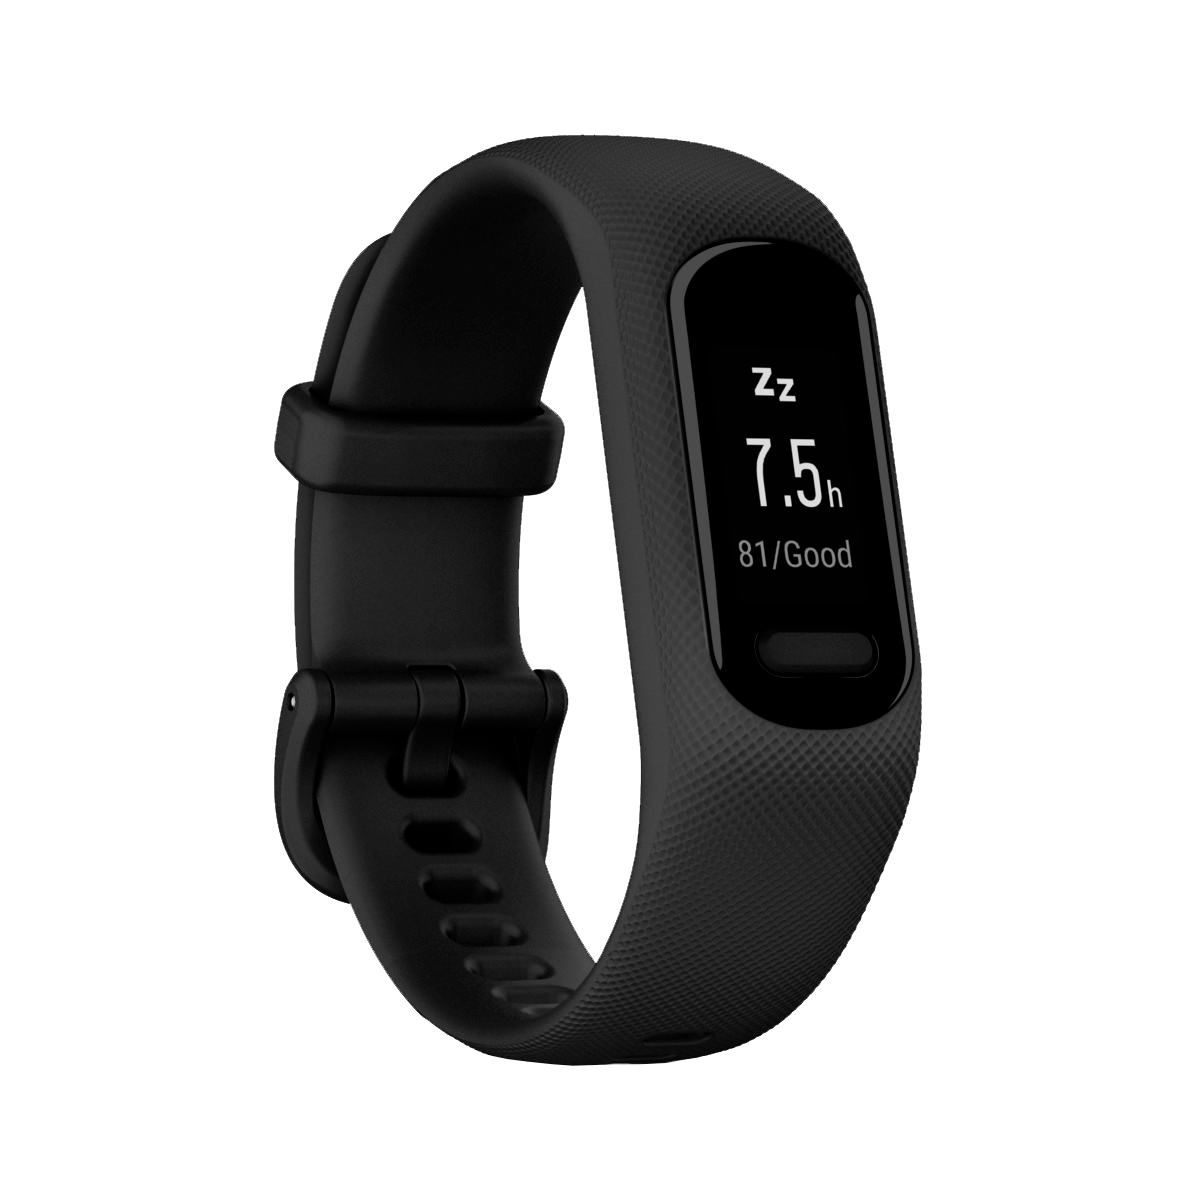 Garmin Vivosmart 5: Leak reveals a bigger display, renders, and sleep  quality evaluation for the upcoming affordable fitness tracker -   News